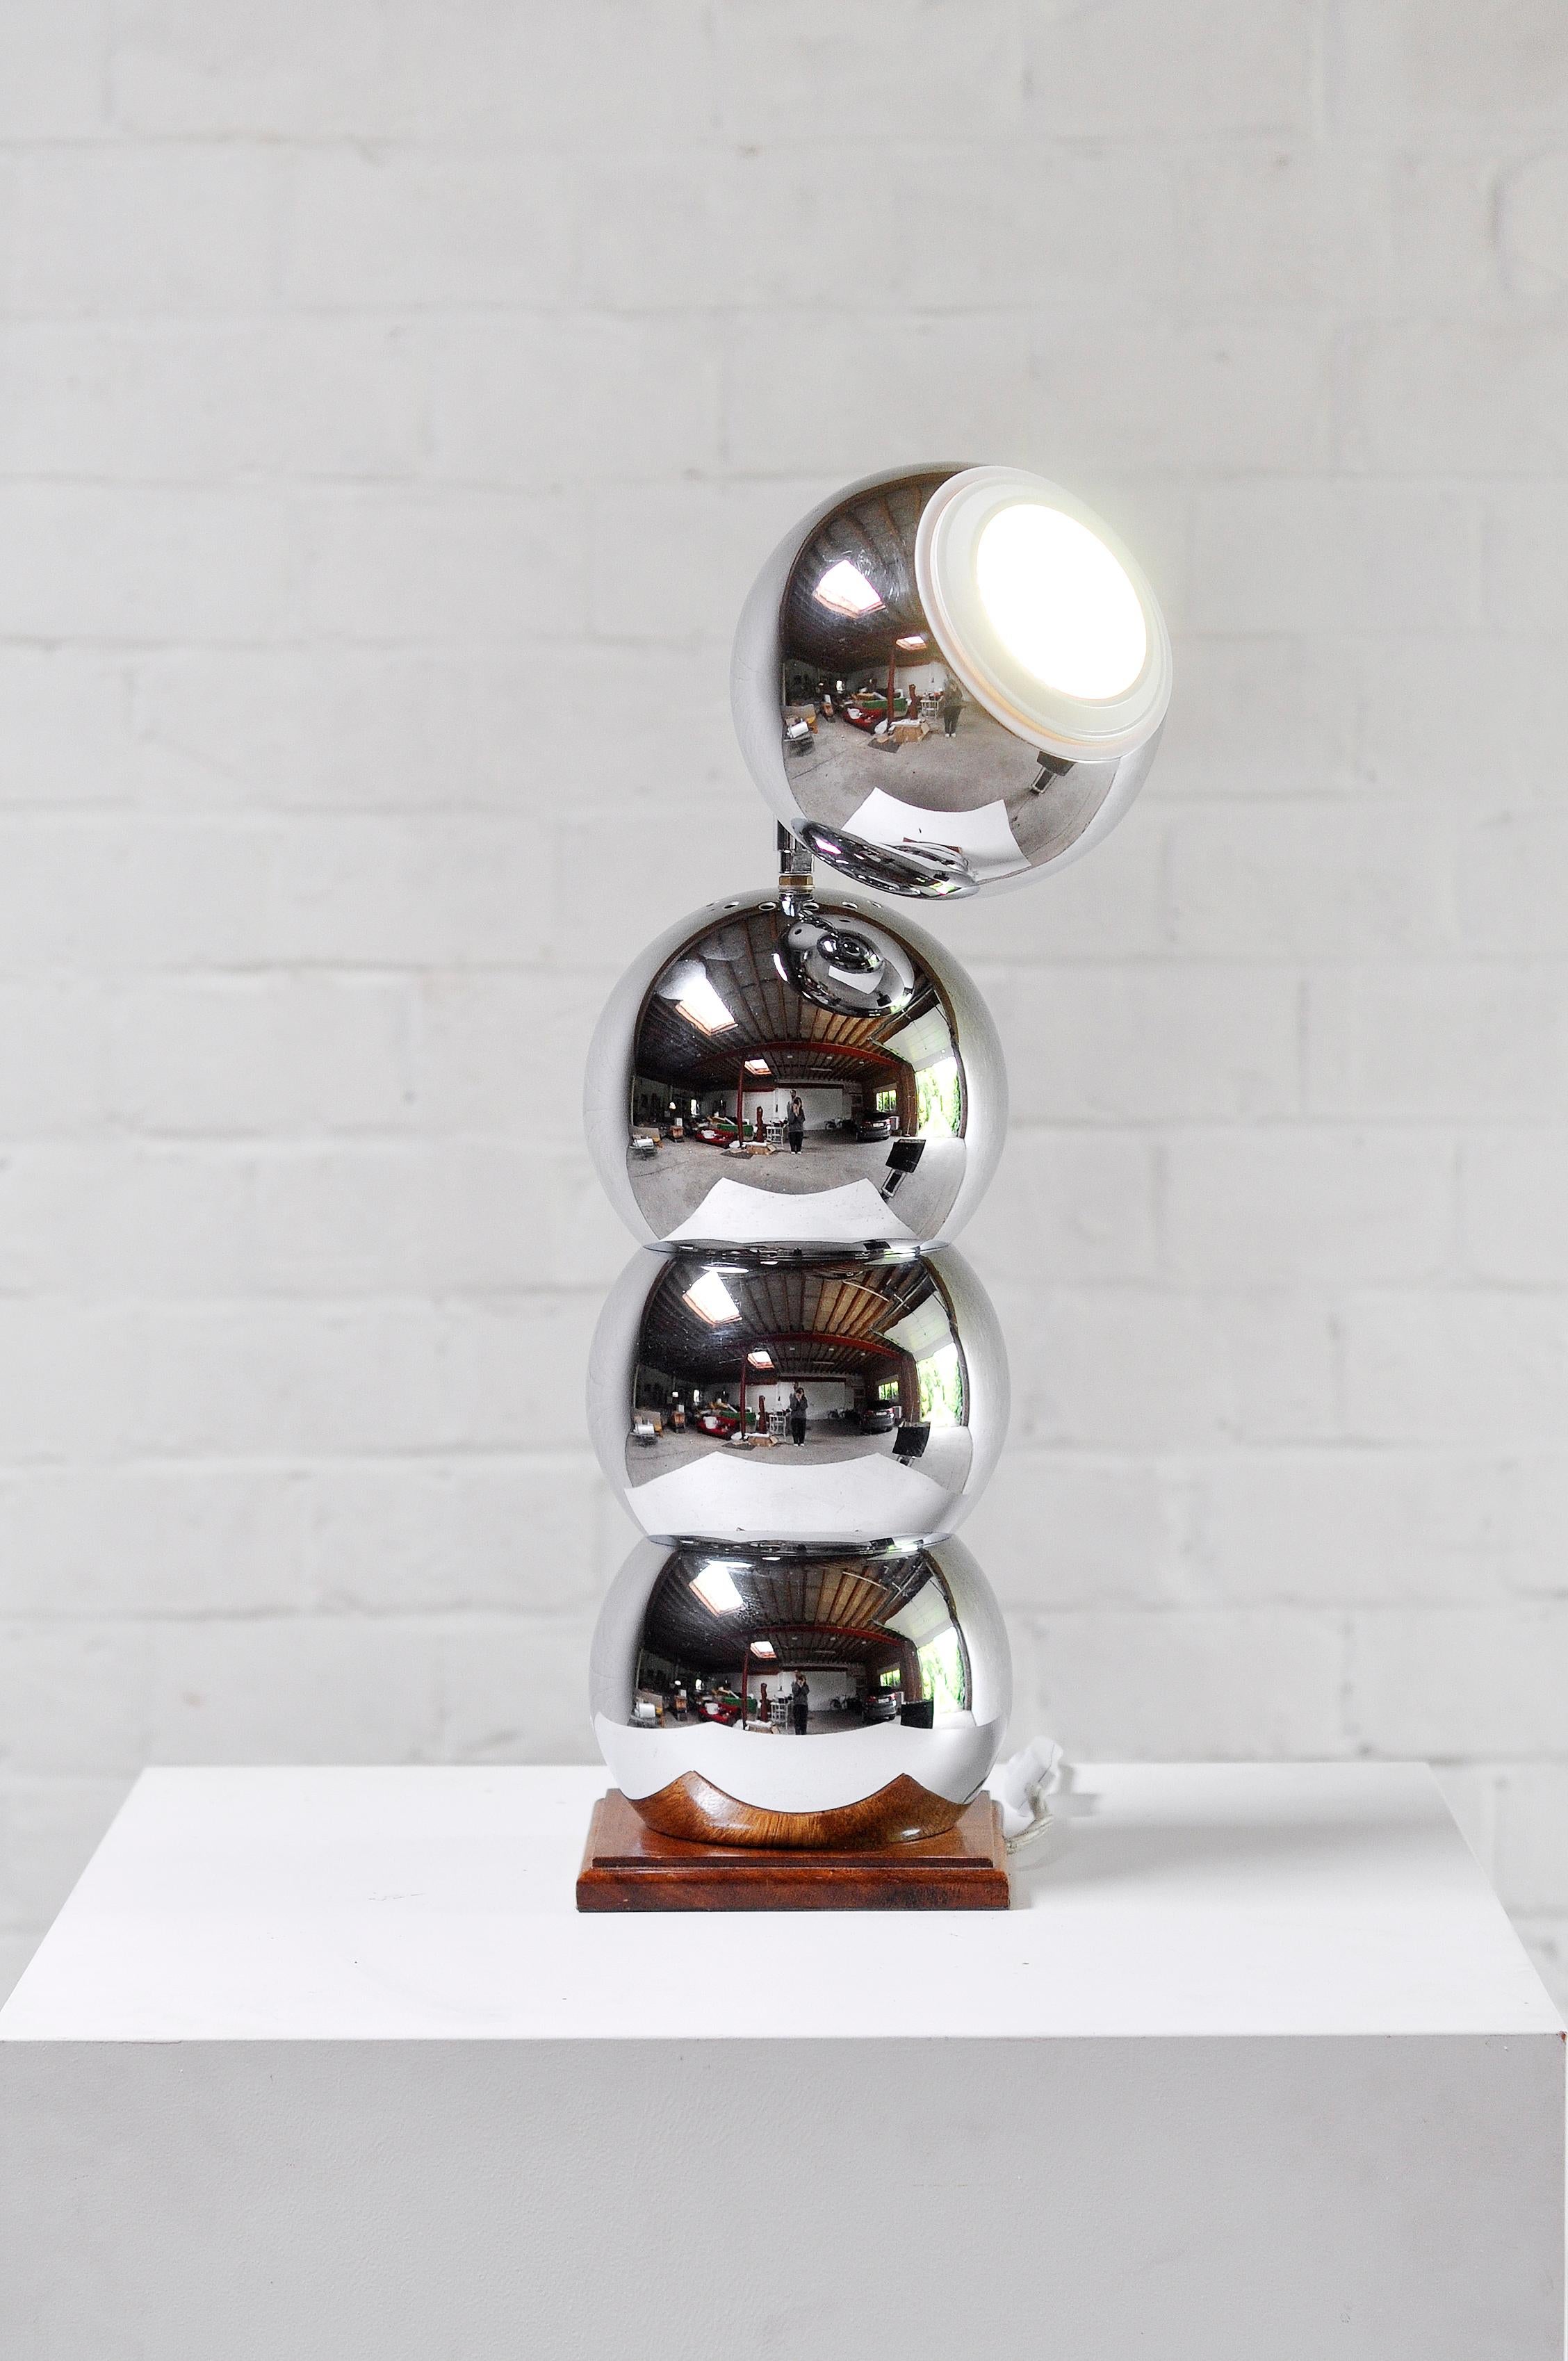 Modernist 'eyeball' Chrome Lamp With Wooden Base, France 1960's In Good Condition For Sale In Zwijndrecht, Antwerp